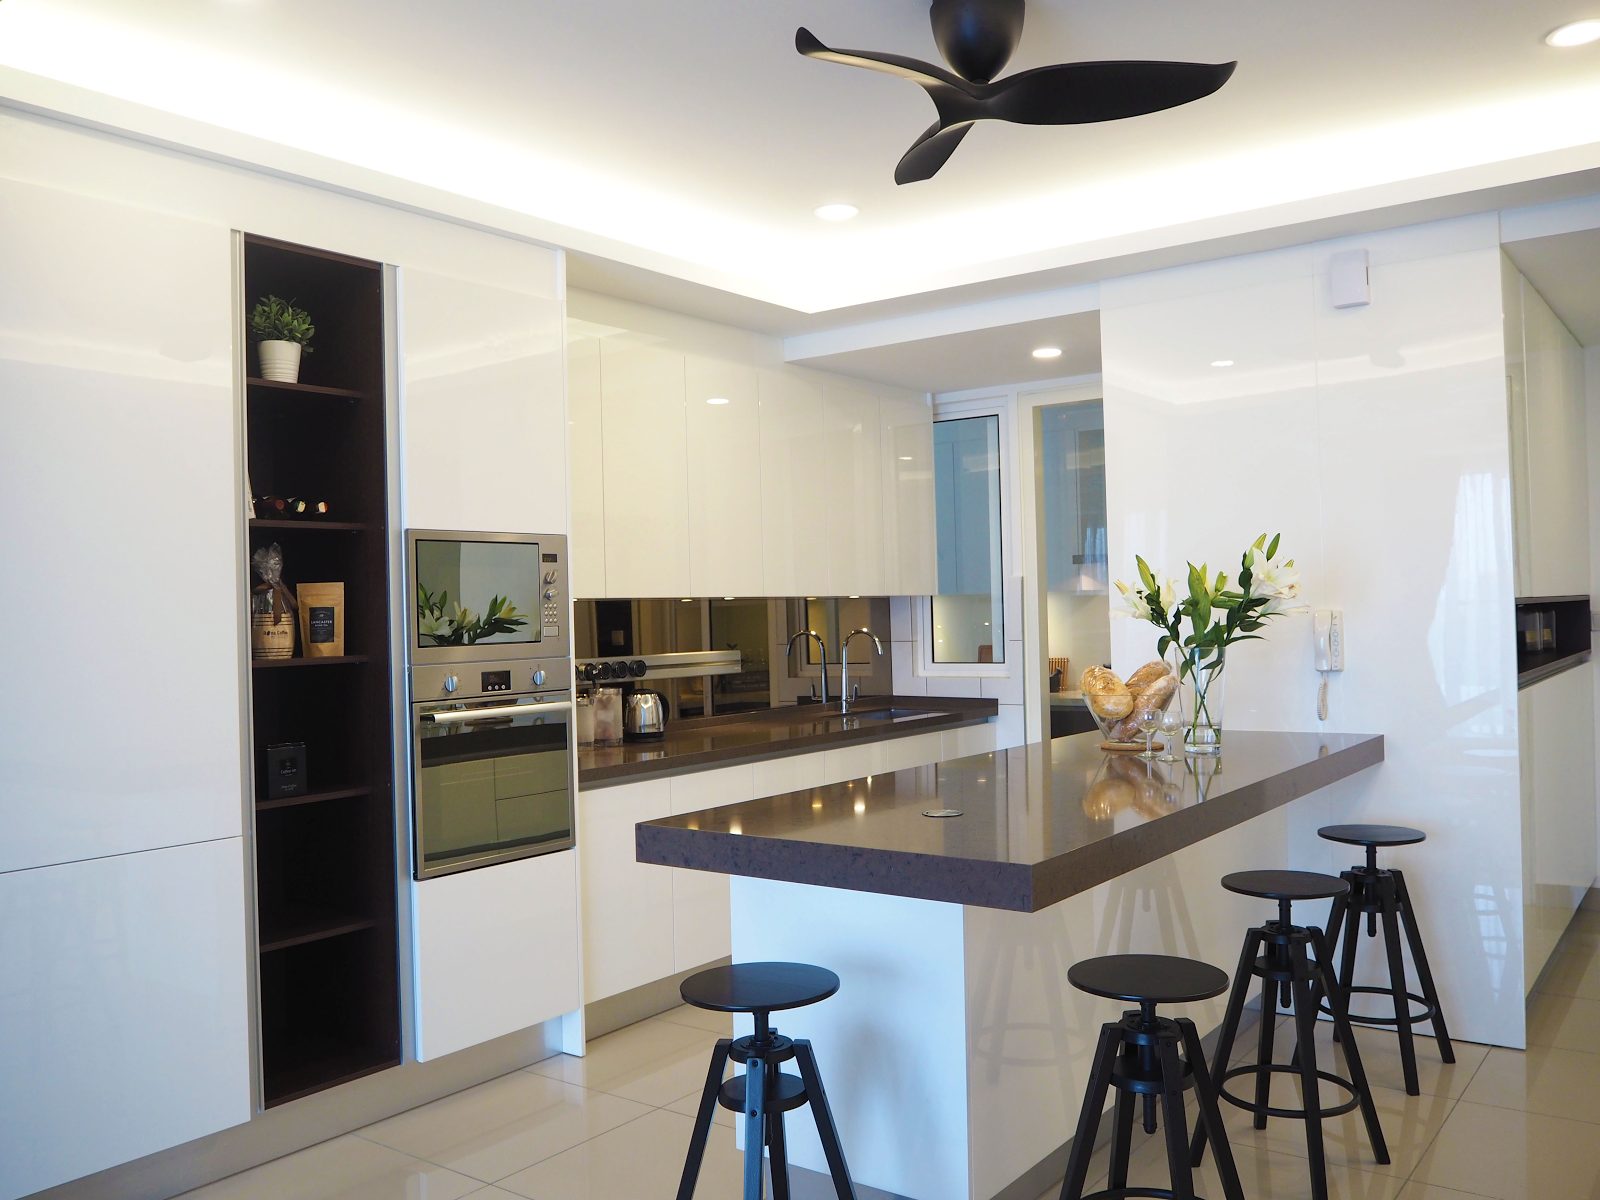 wet and dry Kitchen design for Condominium at Cheras. Project by:Meridian Inspiration